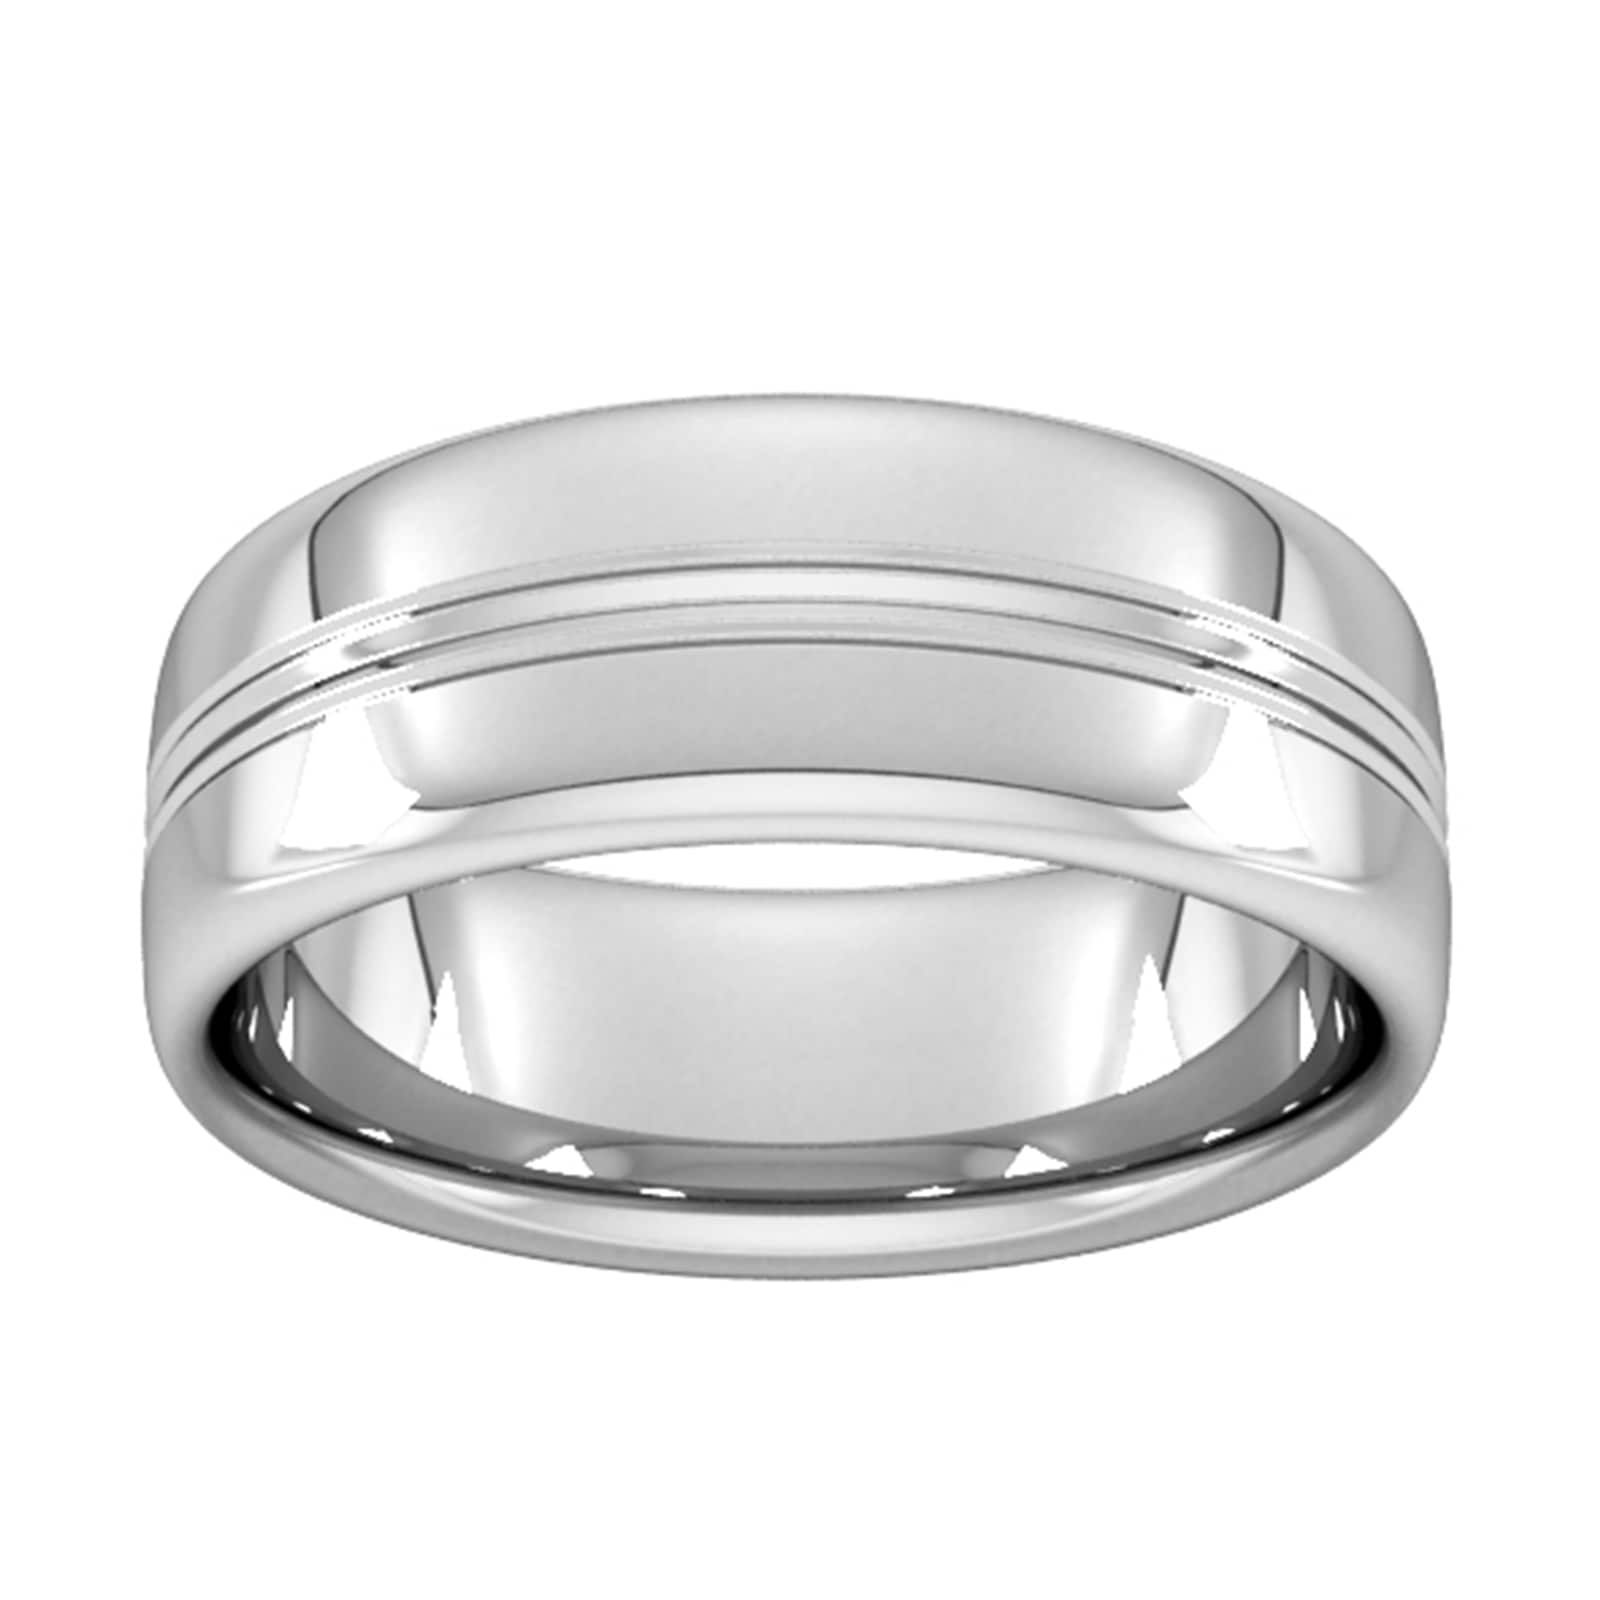 8mm Slight Court Standard Grooved Polished Finish Wedding Ring In 9 Carat White Gold - Ring Size Q